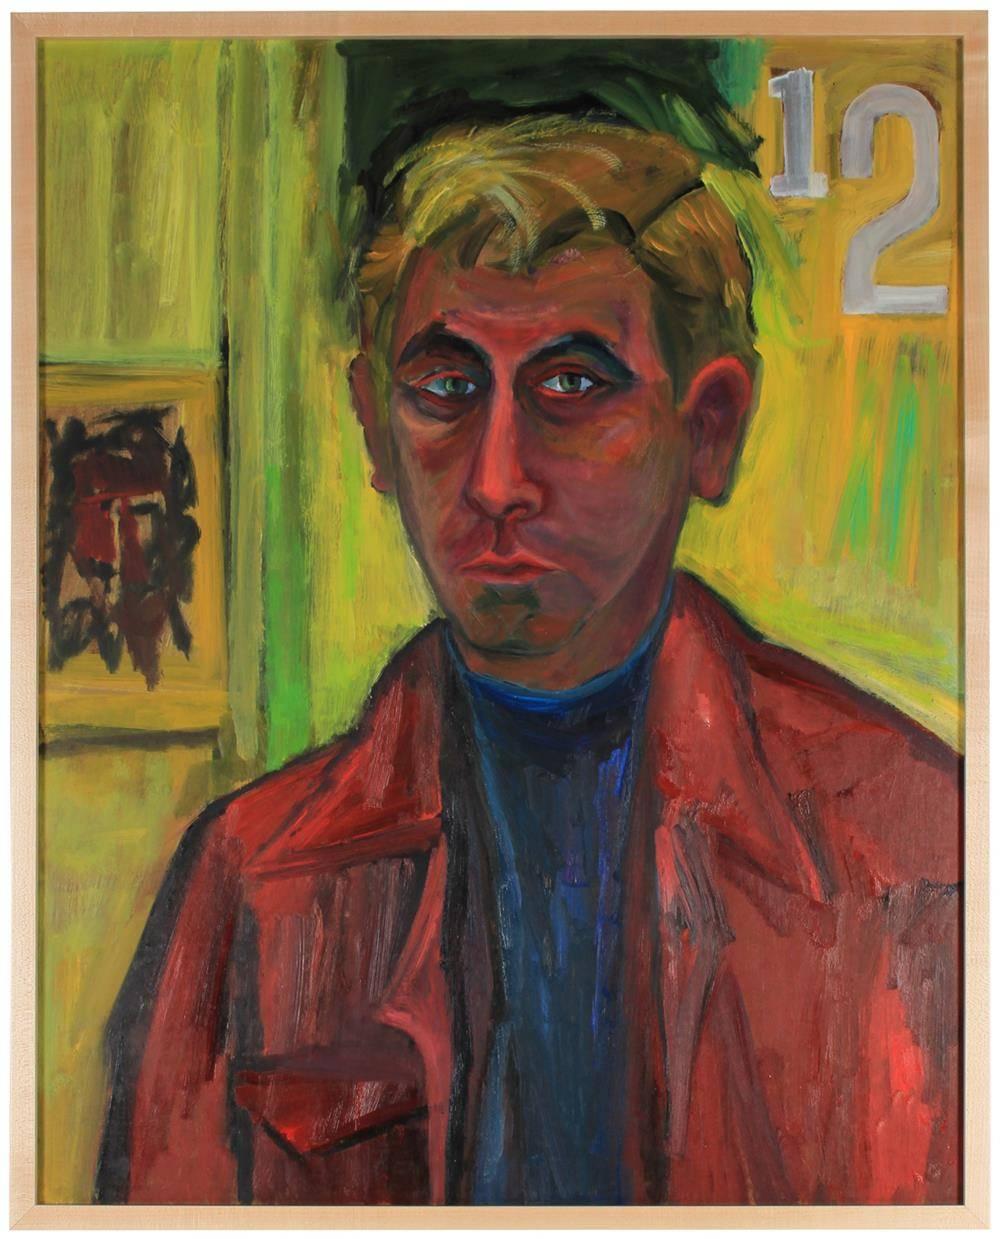 Seymour Tubis Portrait Painting - "Self-Portrait", Bright Oil Painting in Lime Green, 1970s